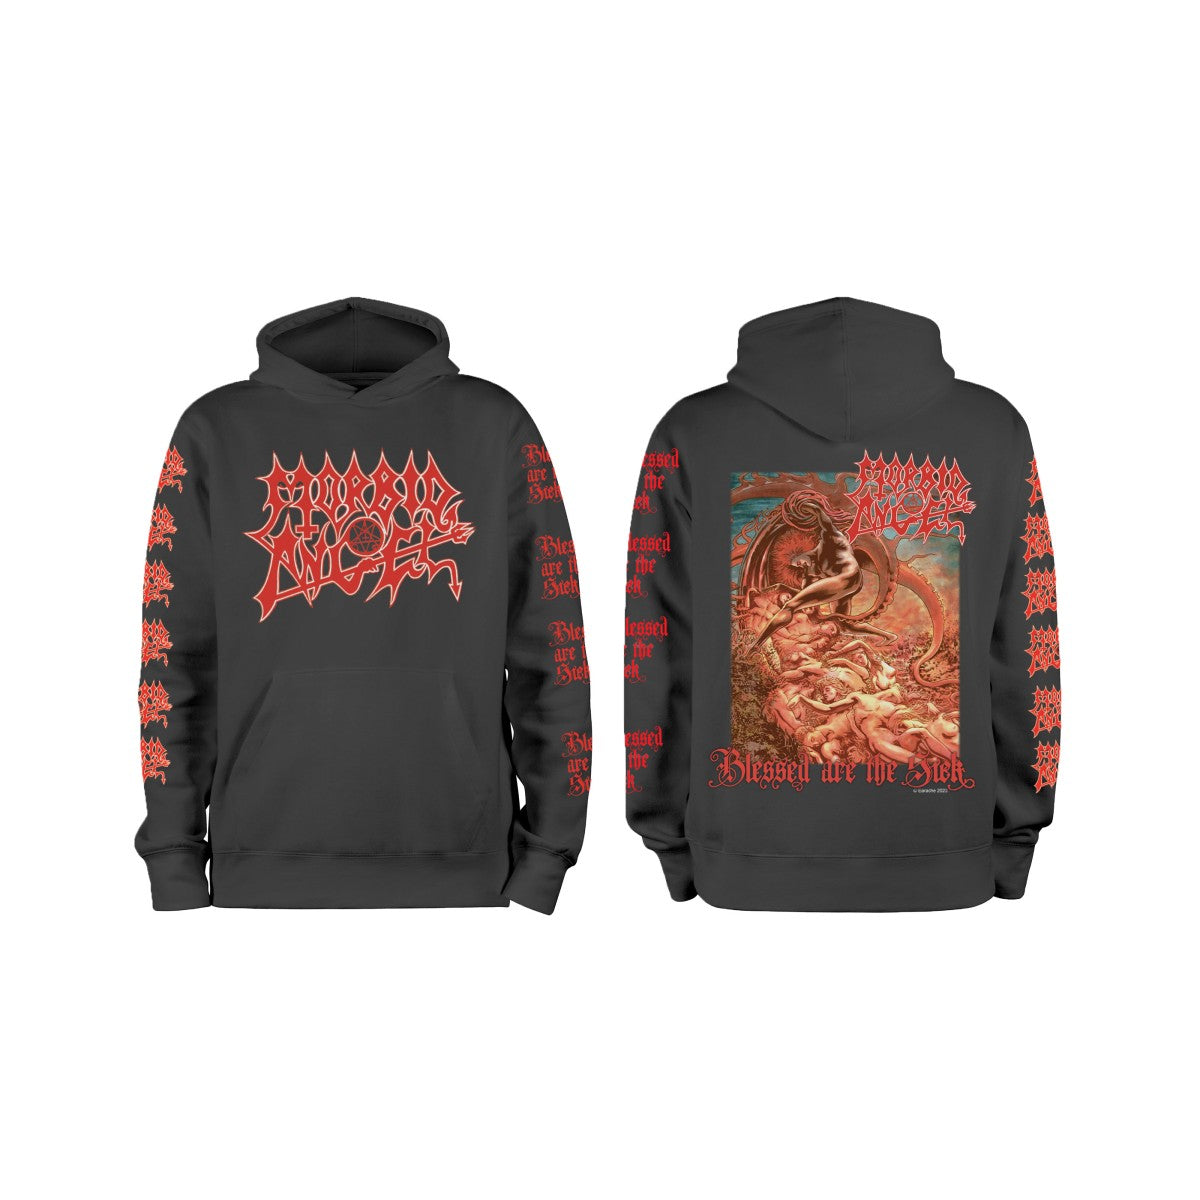 Morbid Angel "Blessed Are The Sick" Pullover Hoodie